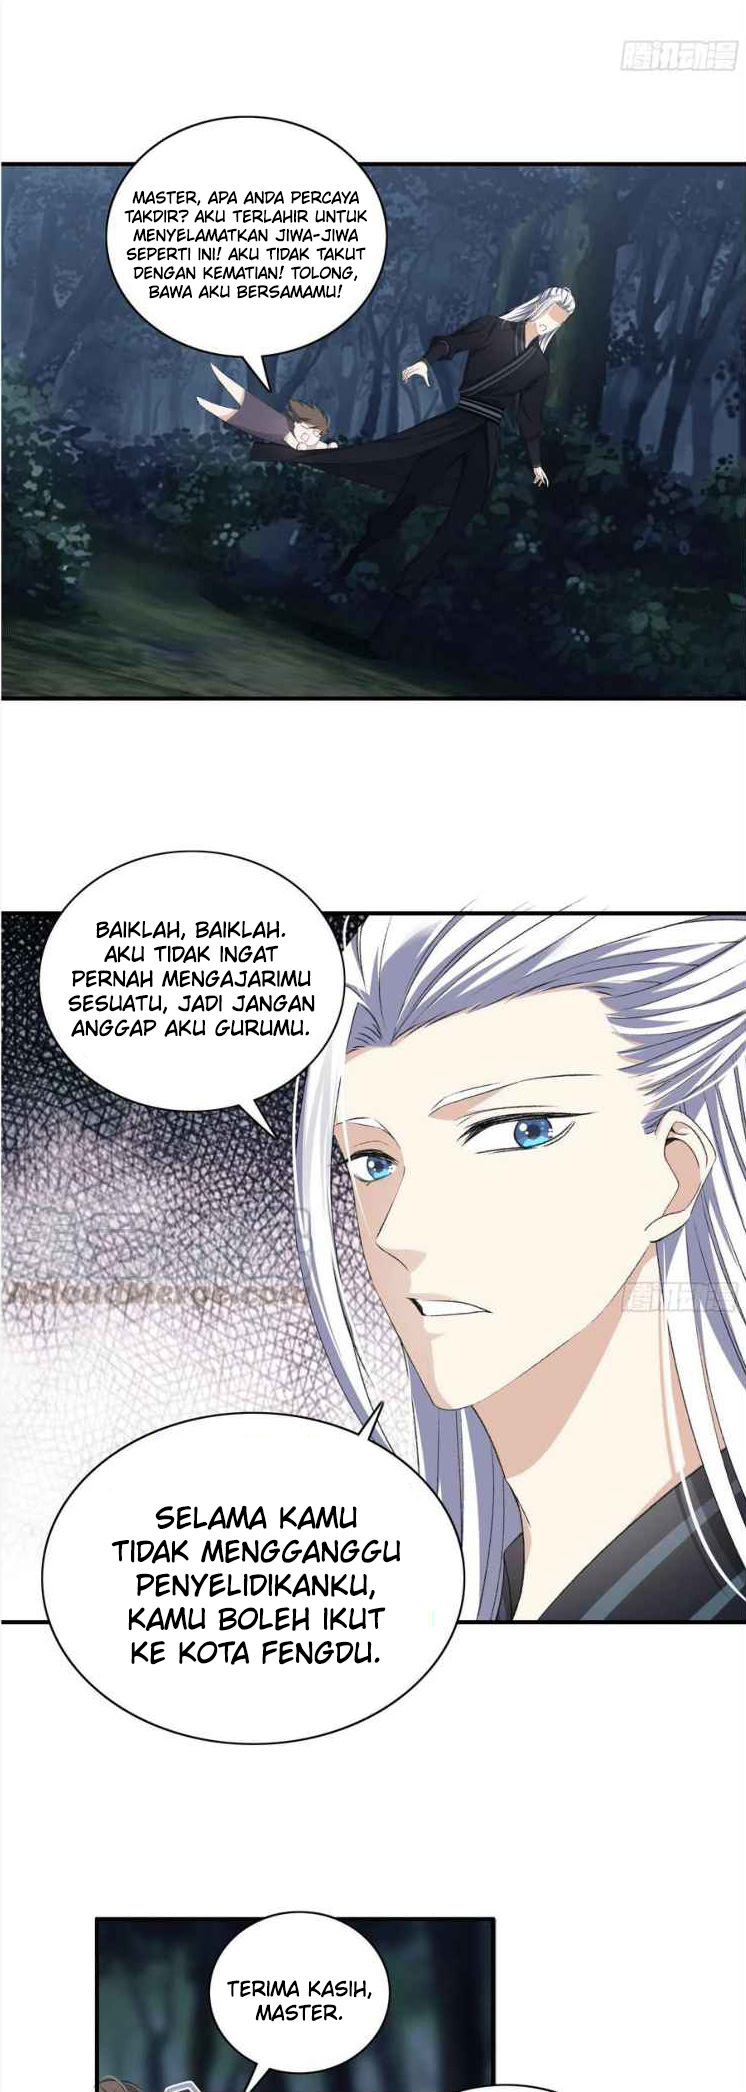 Strongest System Yan Luo Chapter 104 9